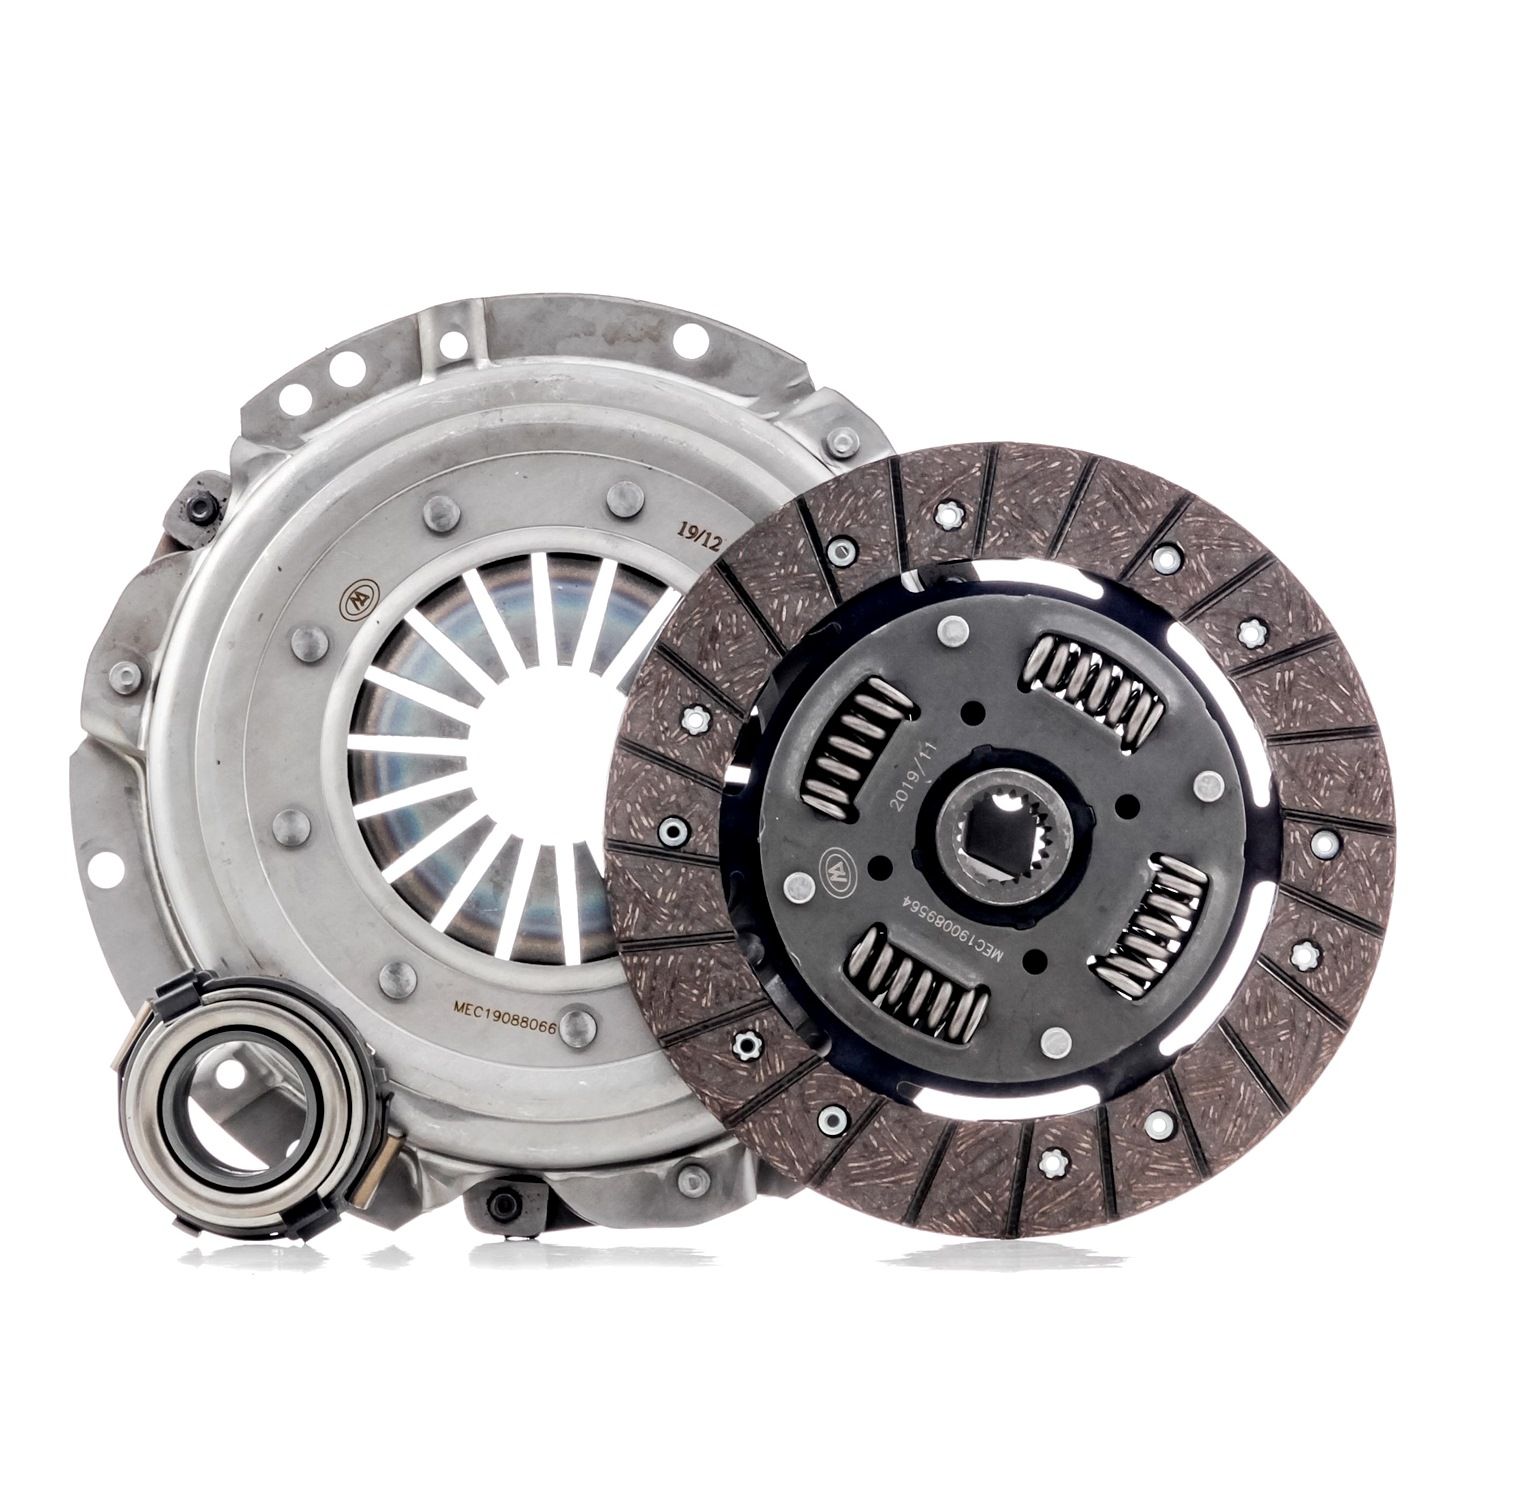 MECARM MK9152 Clutch kit with clutch release bearing, 200mm